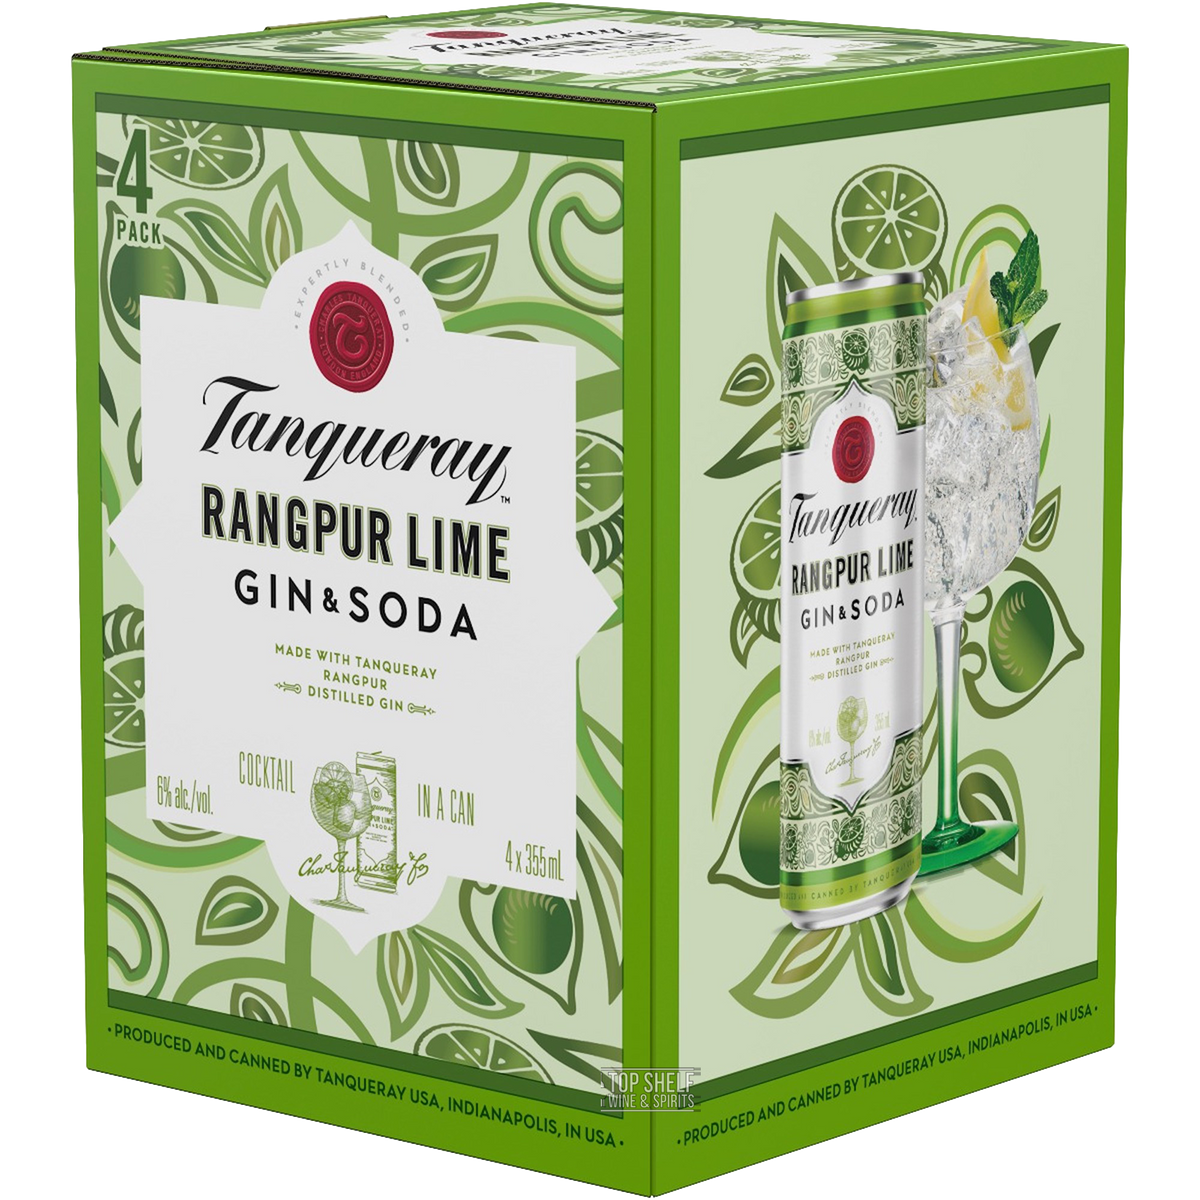 Soda & Cans pack Gin Lime Tanqueray 4 Rangpur